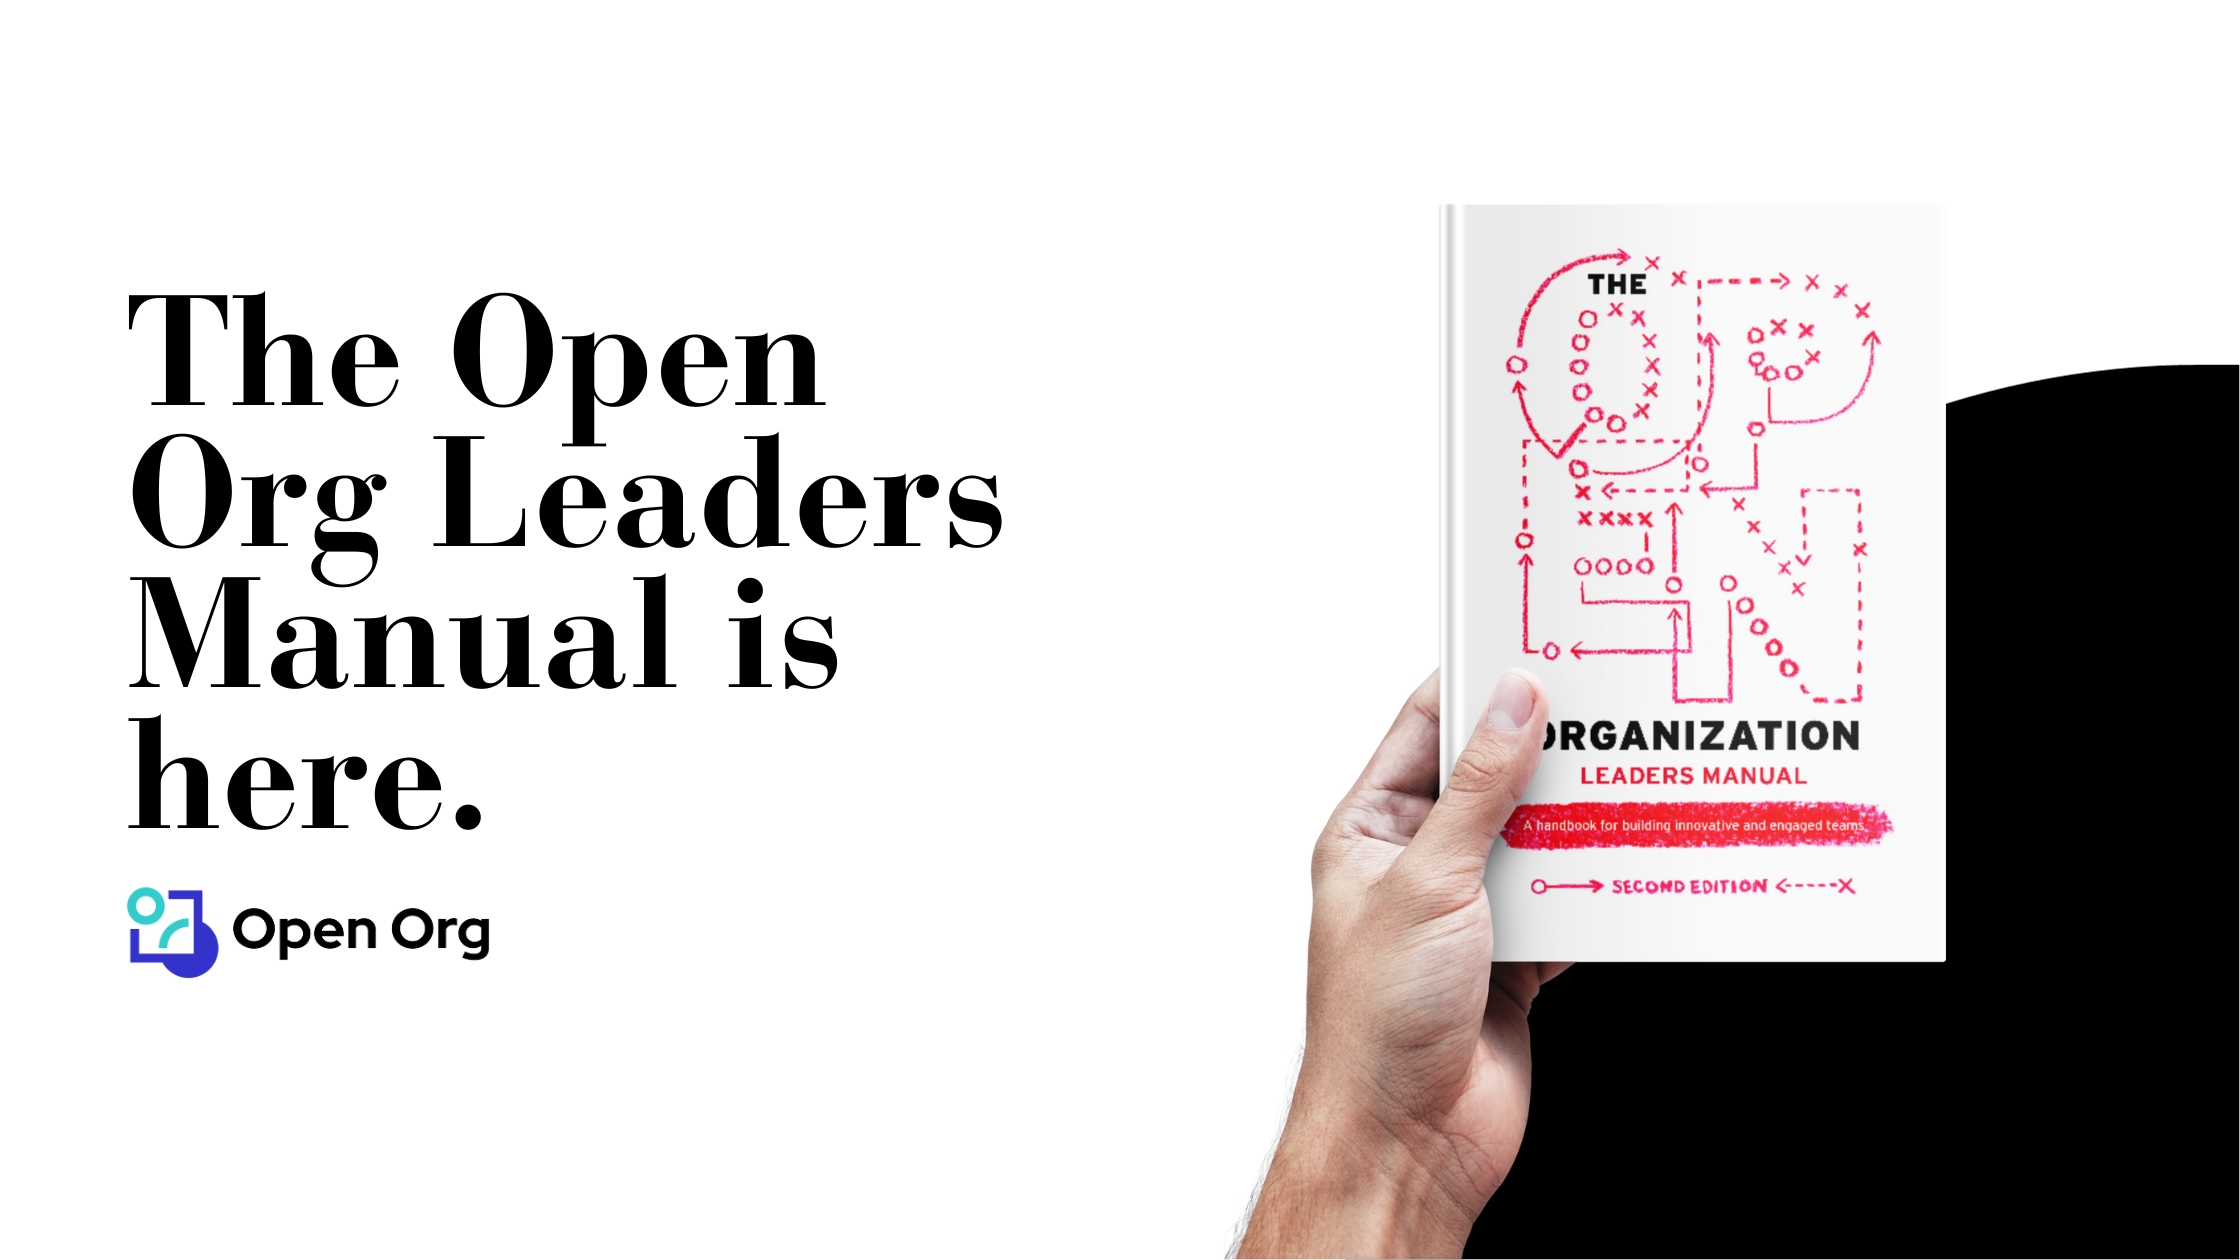 New Release: The Open Organization Leaders Manual (second edition)